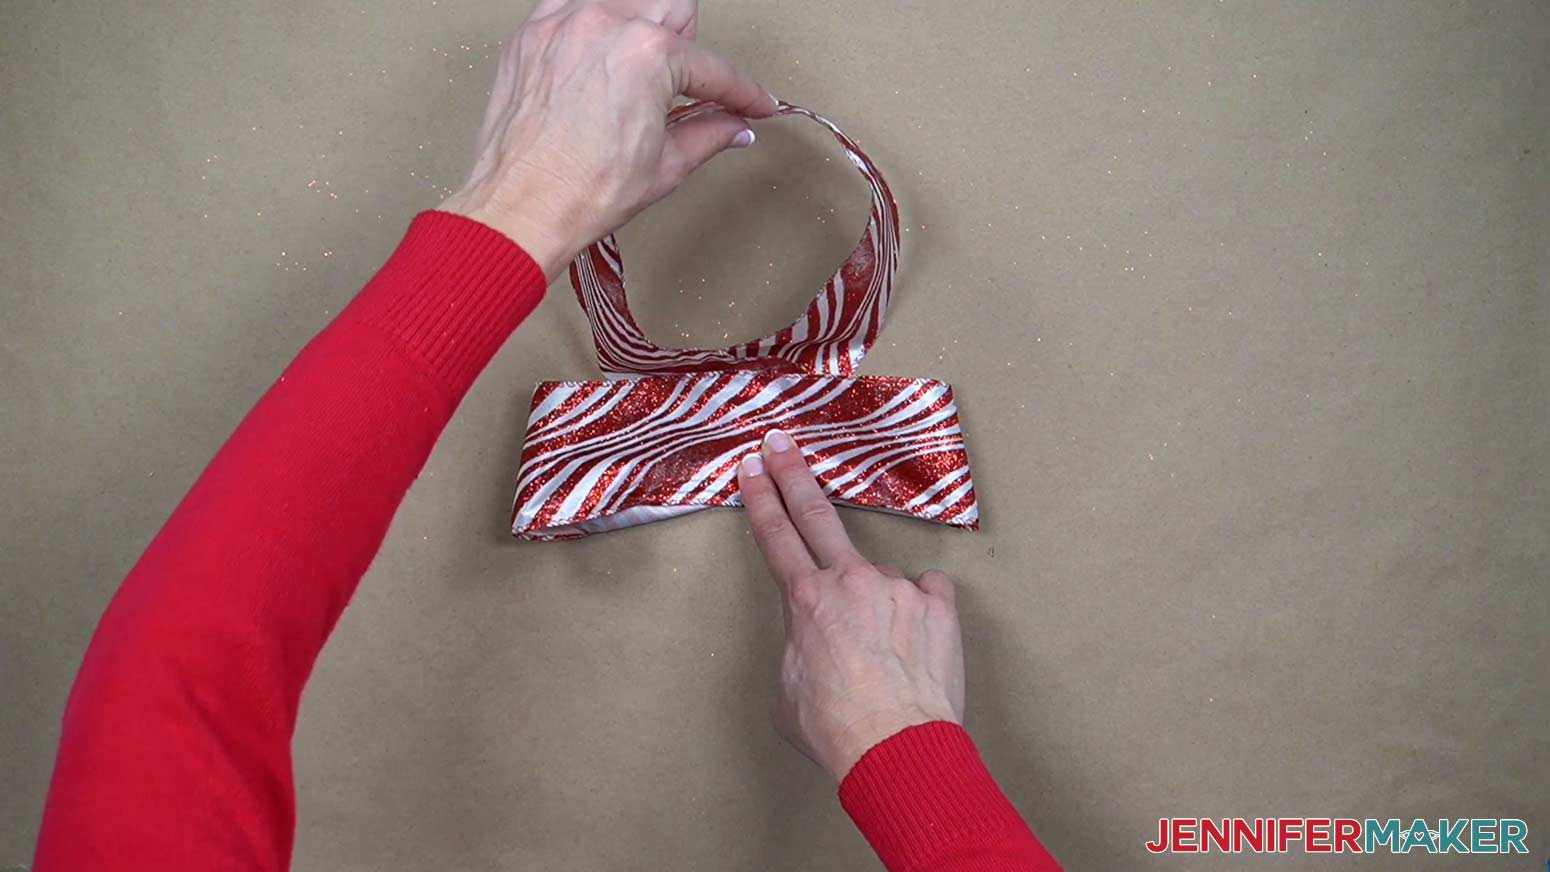 Bring the middle of each loop to the center of the ribbon.